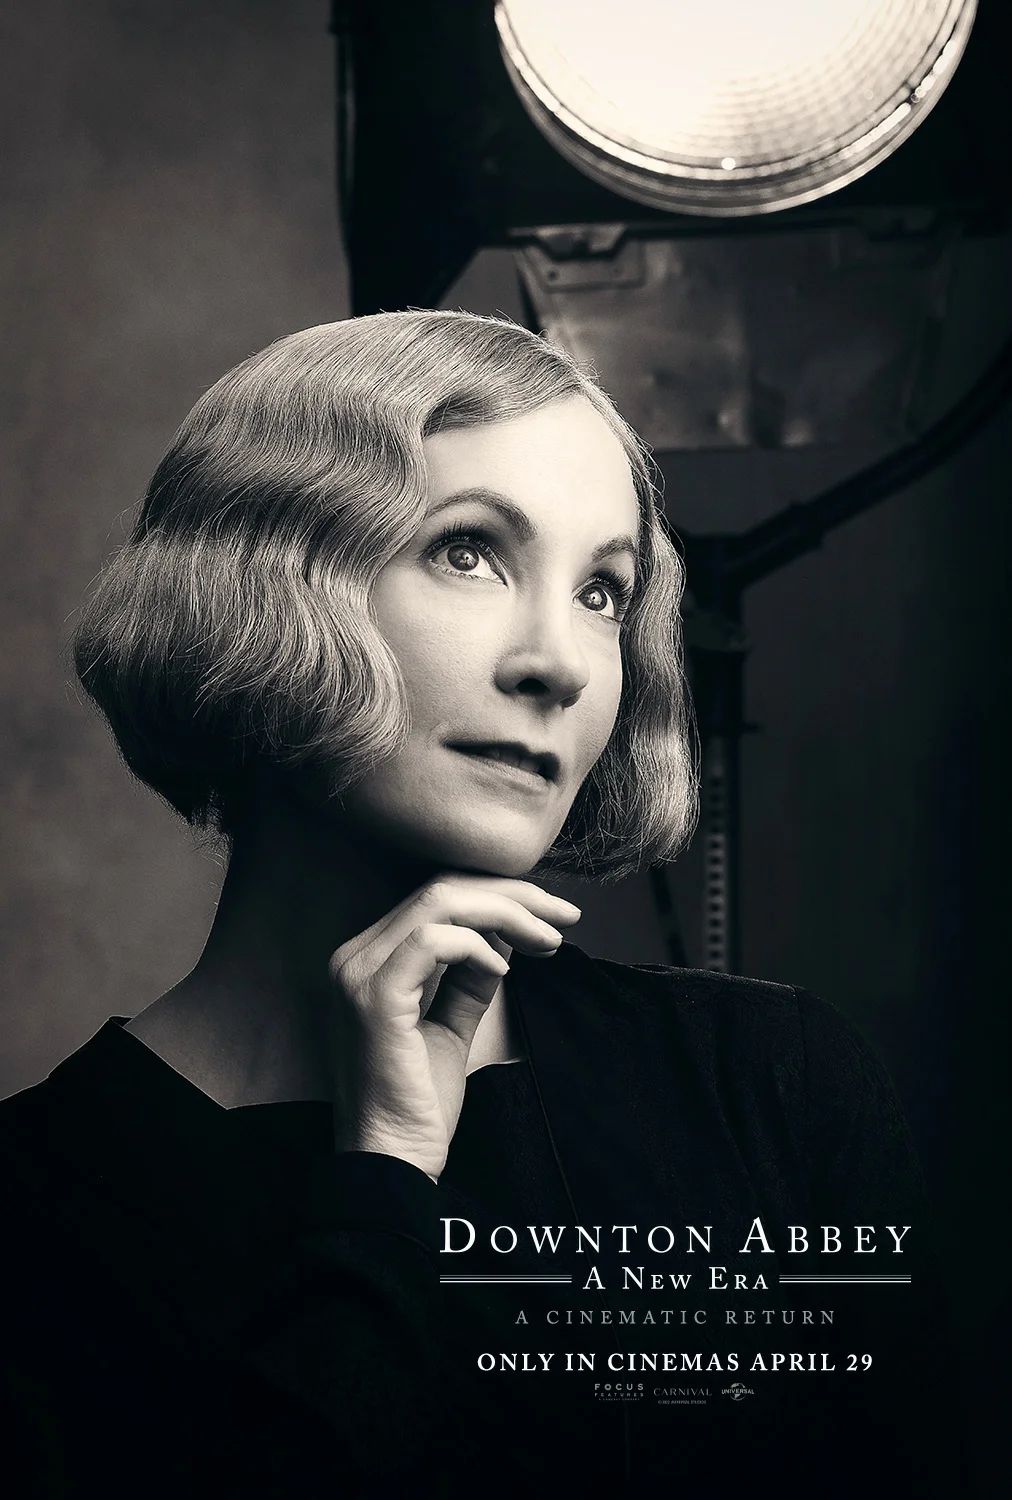 downton-abbey-a-new-era-released-character-posters-multiple-main-actors-appear-12